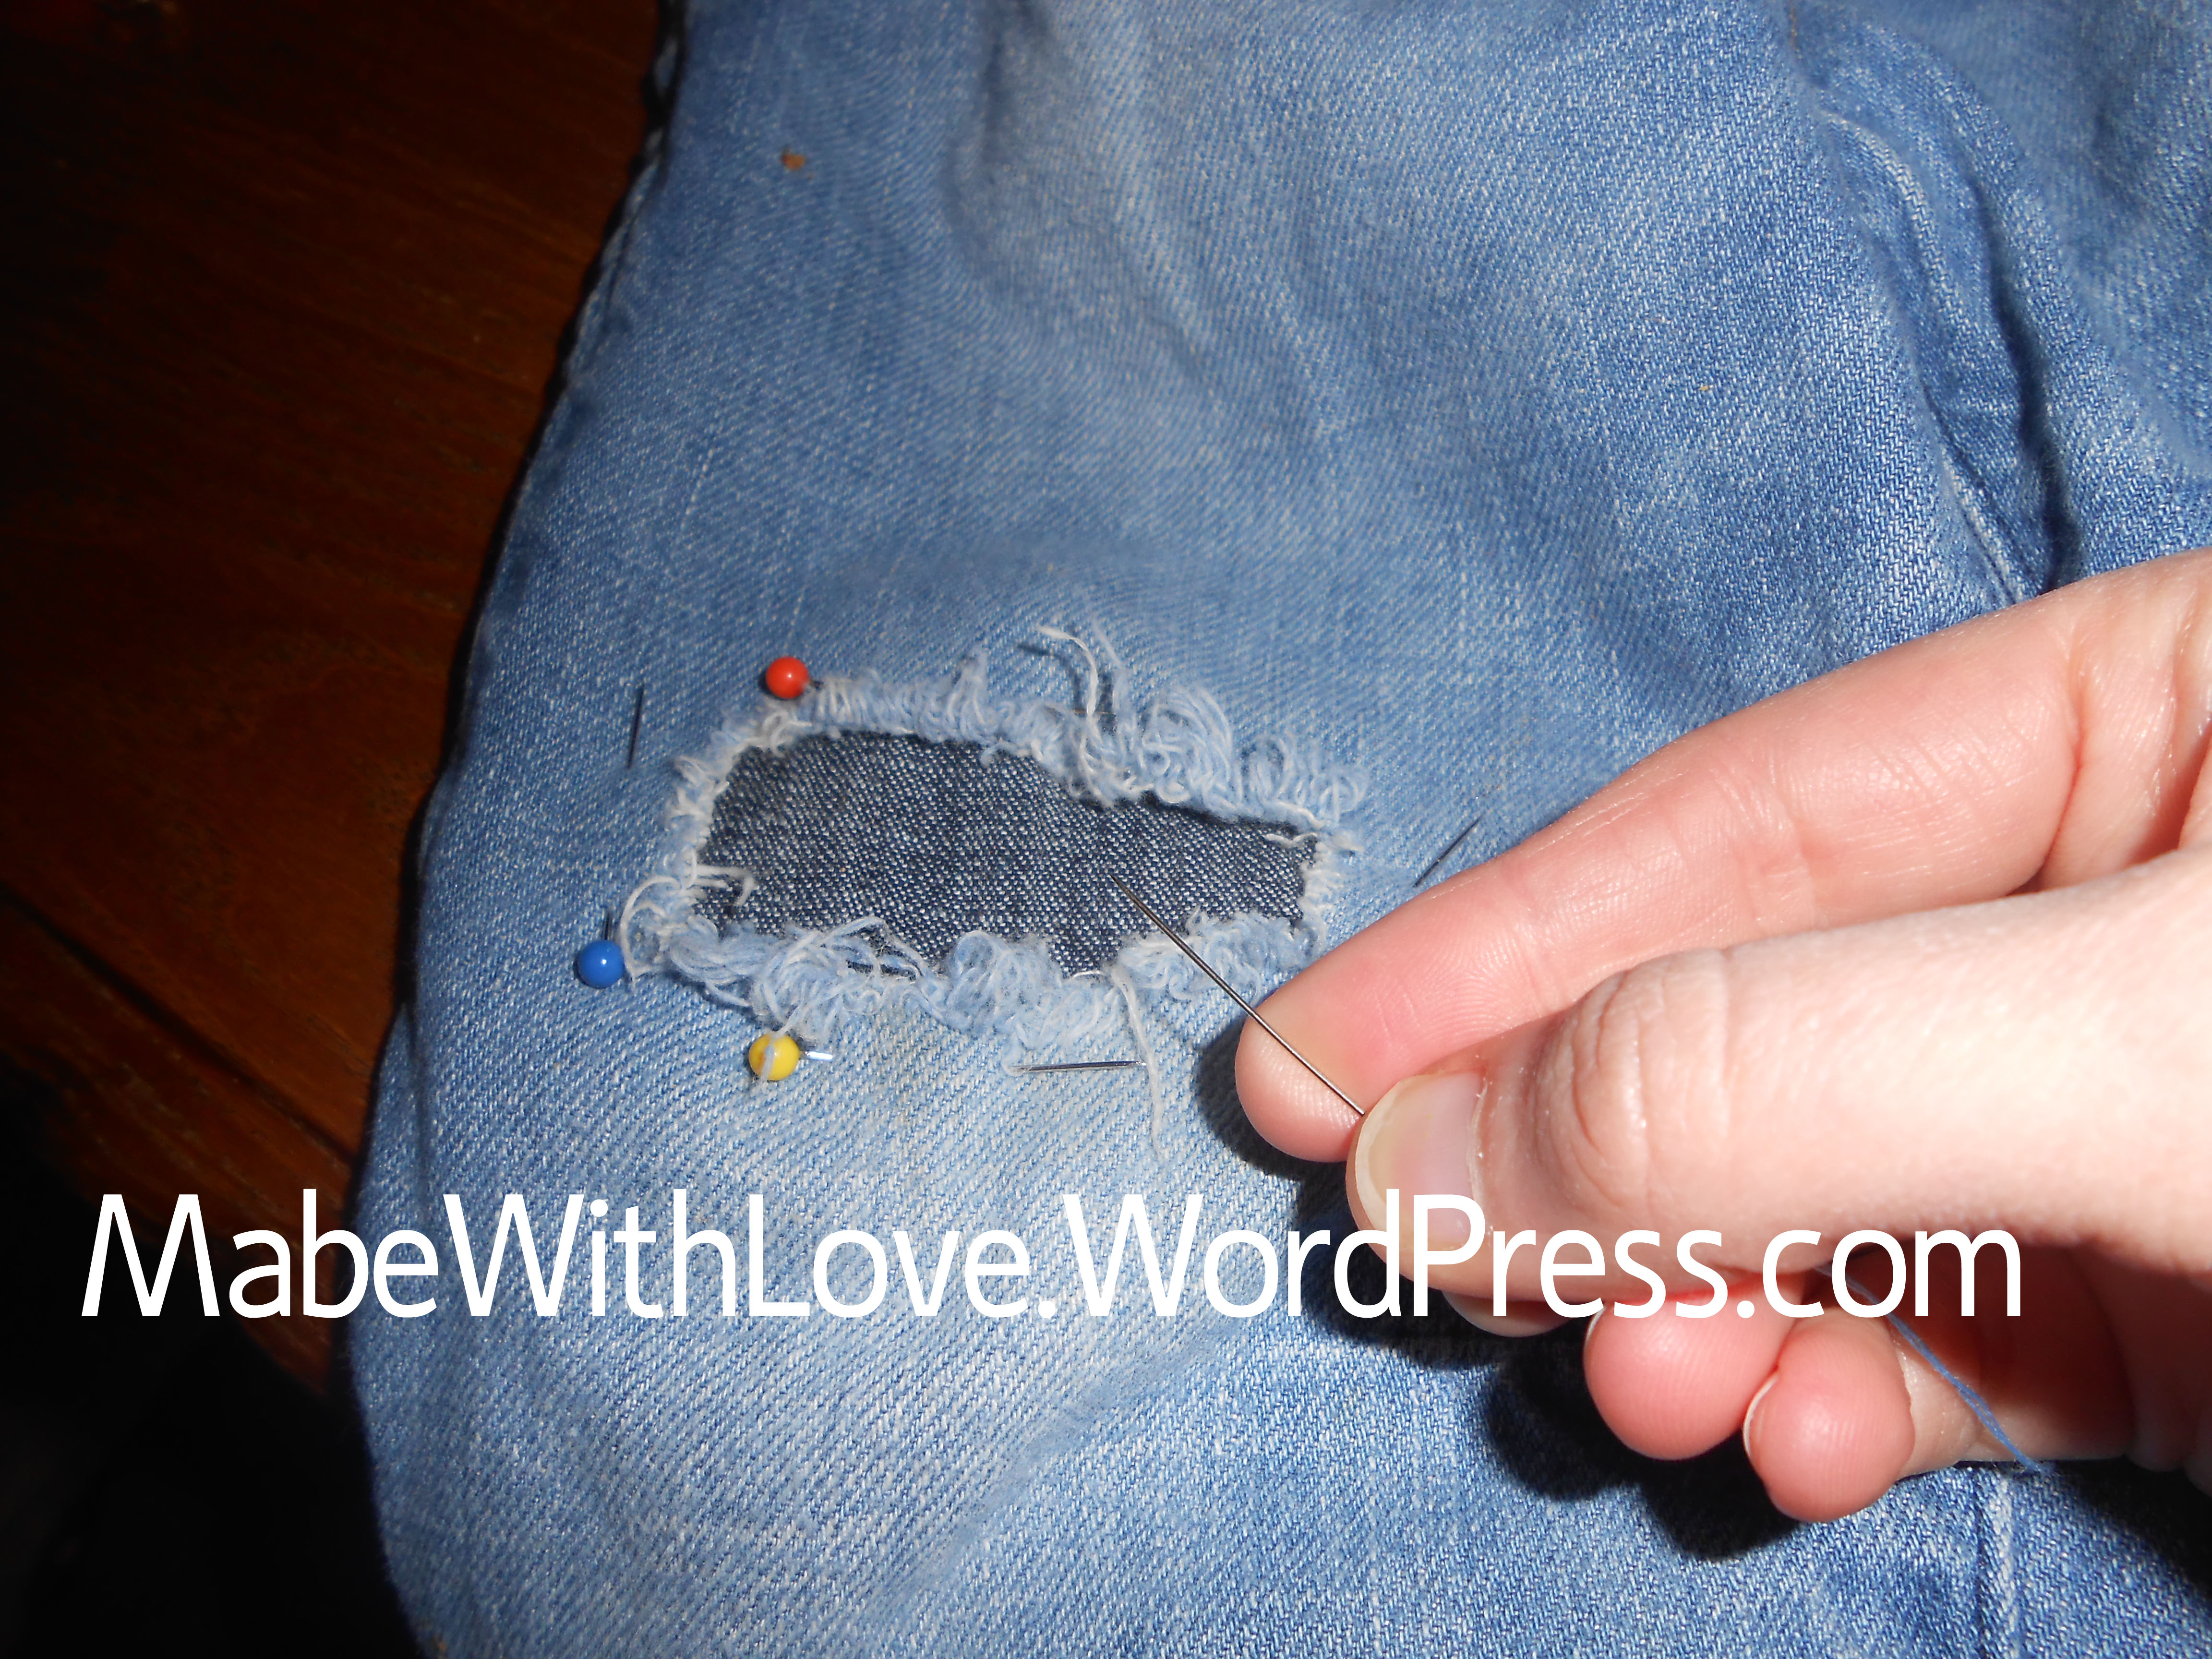 patching jeans by hand